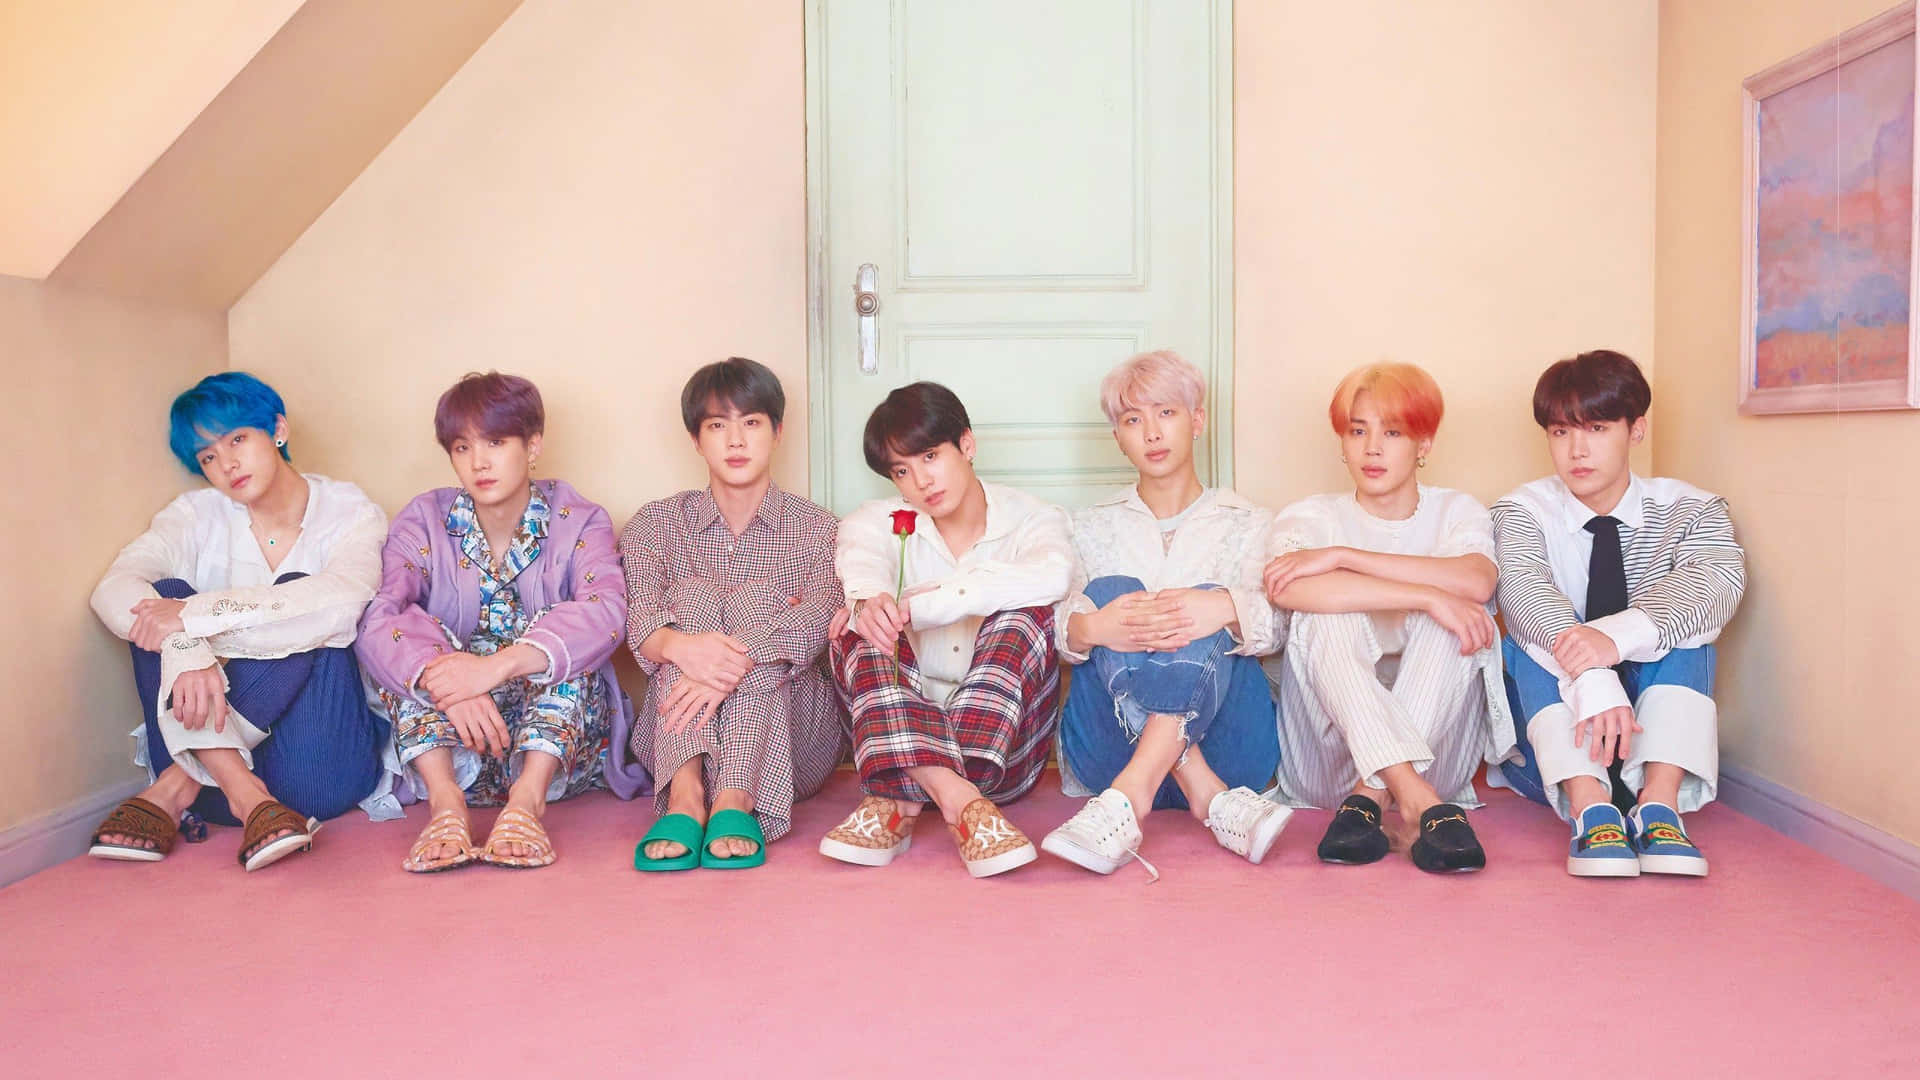 Enjoy the aesthetic perfection of BTS with this pink desktop wallpaper Wallpaper